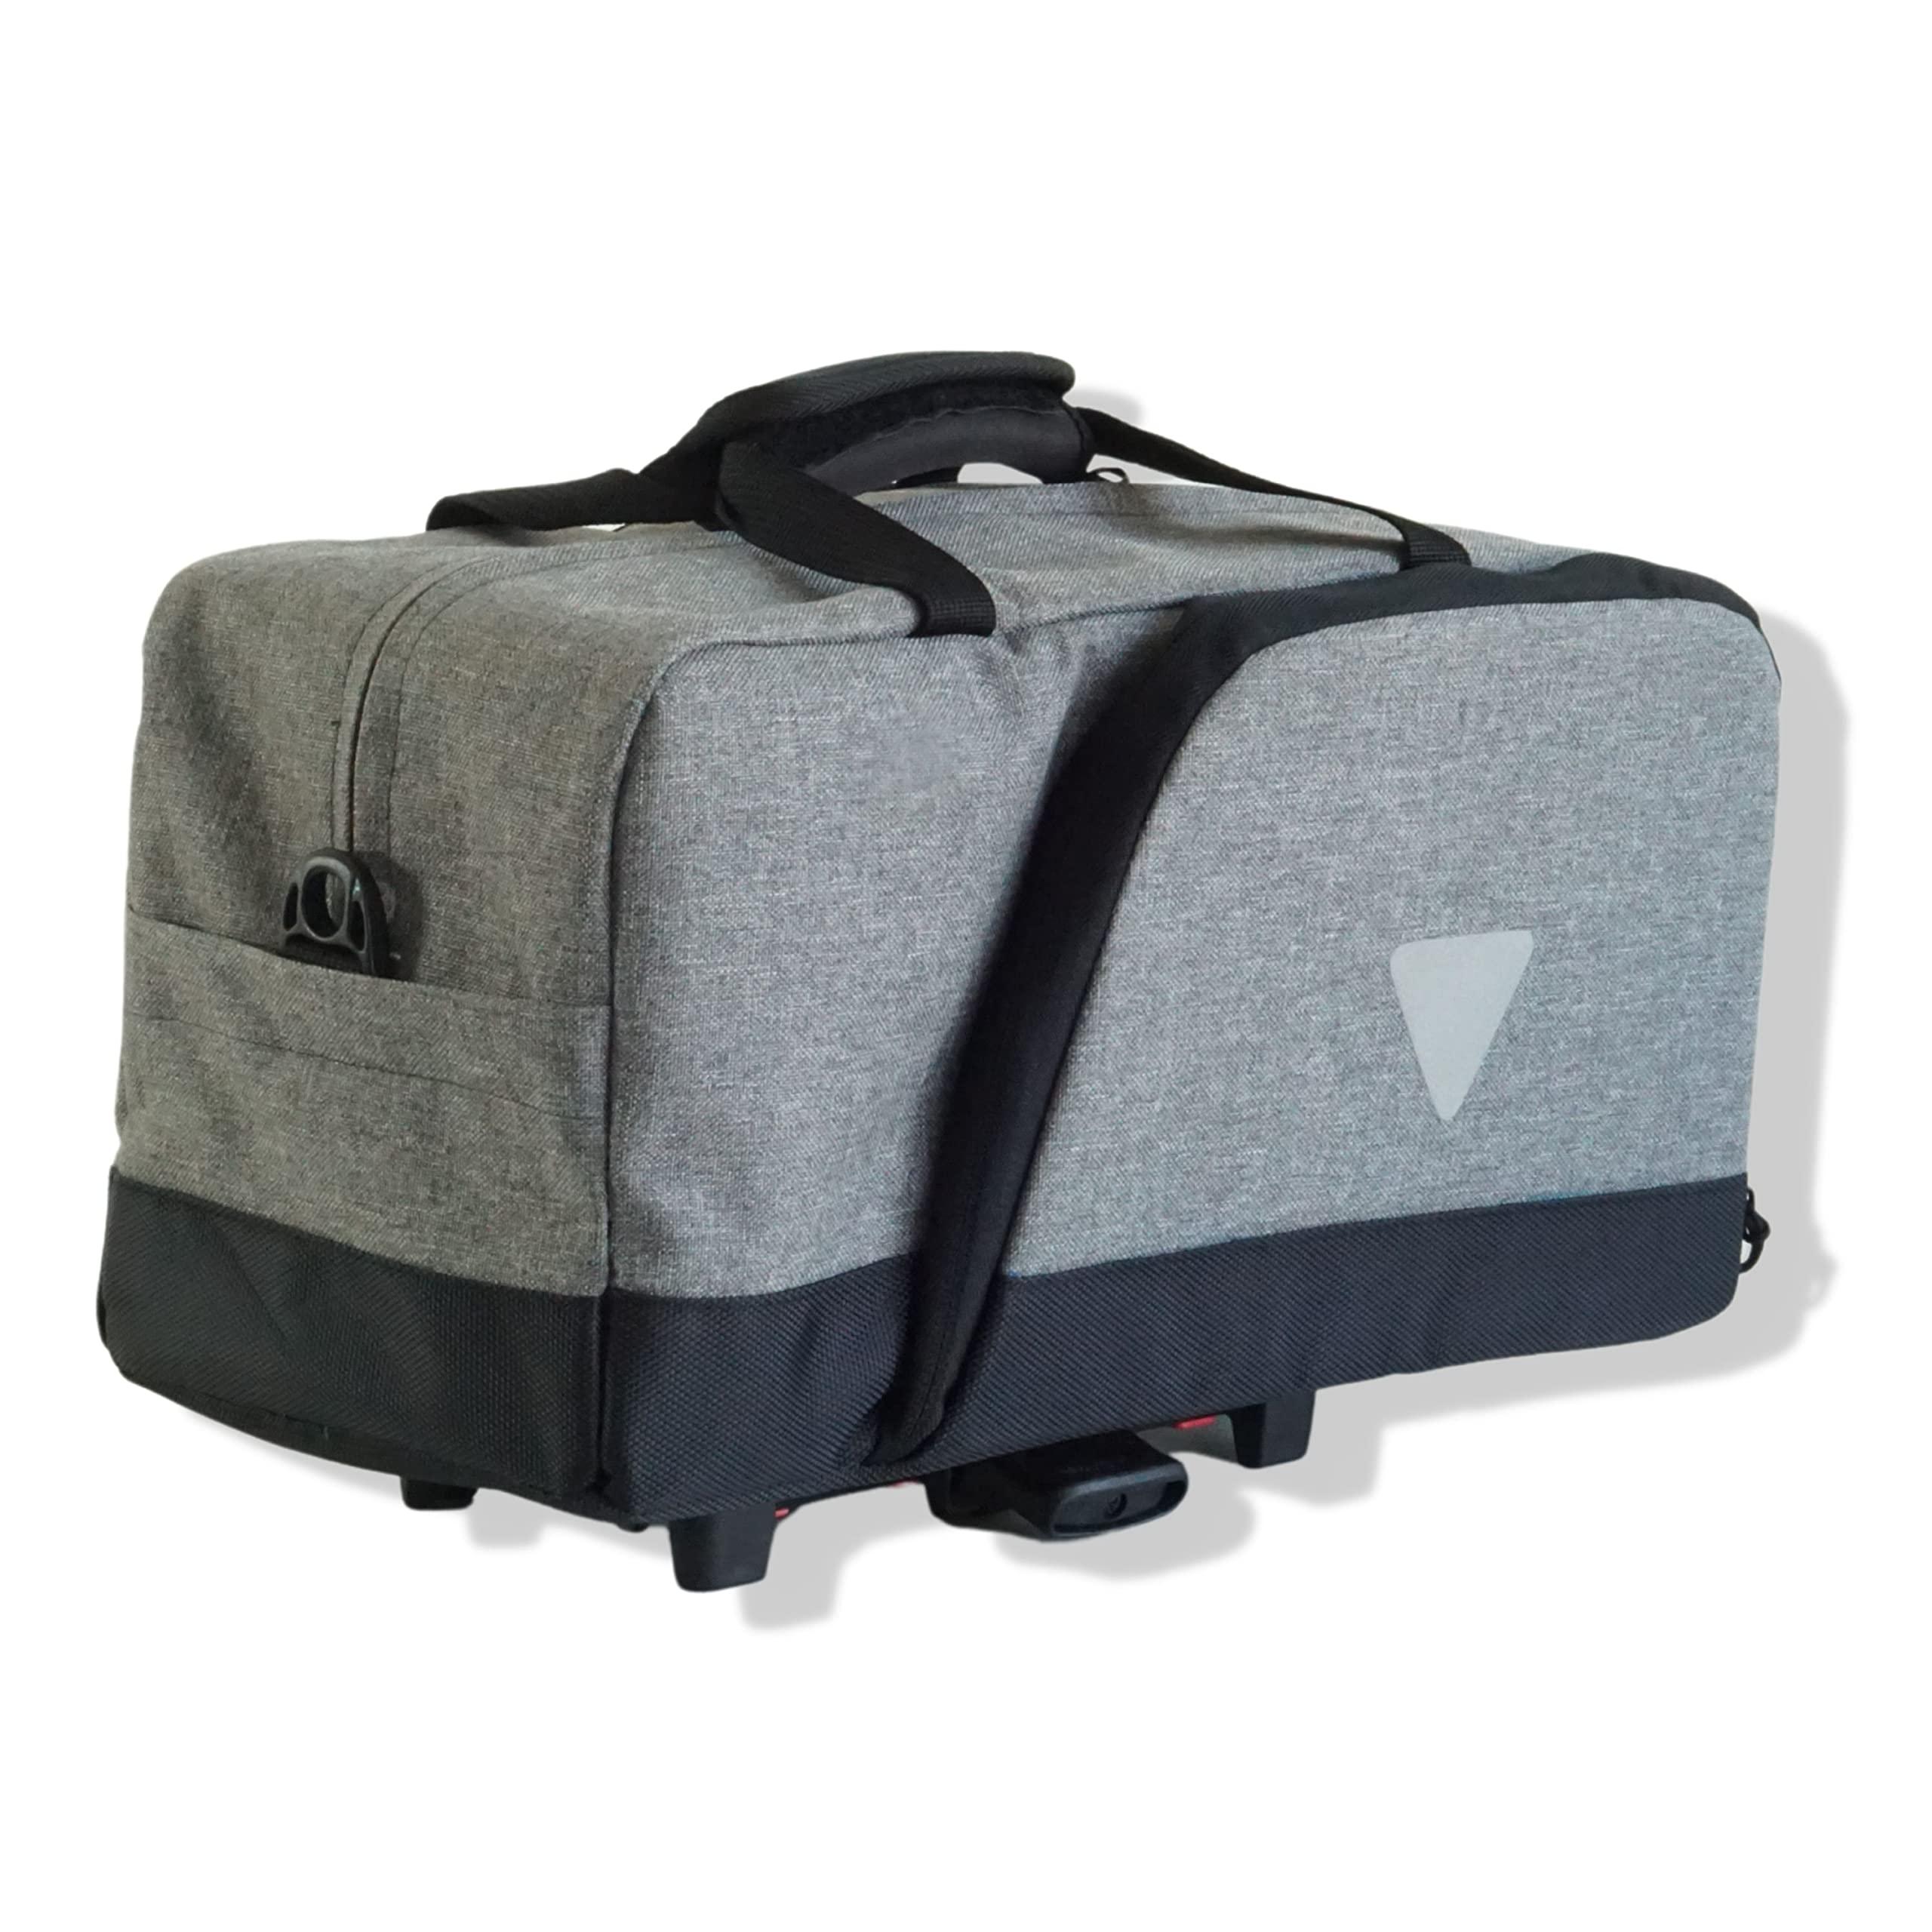 Vincita Nash Bike Trunk Bag - Universal Quick-Release Fit All Rear Racks with Expandable Panniers - Bicycle Commuter Bag Suitable for All Bicycles (Gray)